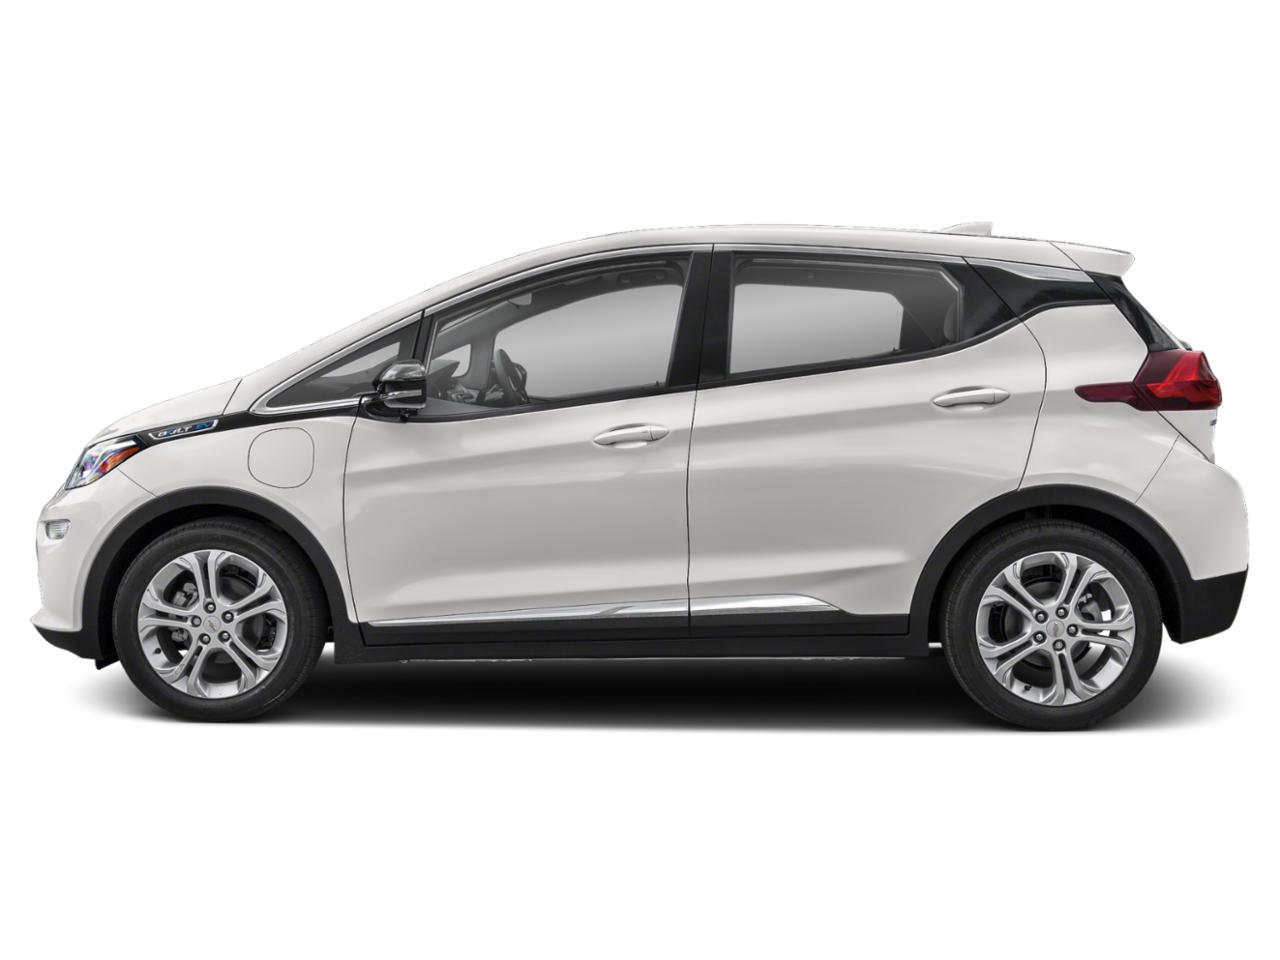 Used 2020 Chevrolet Bolt EV LT with VIN 1G1FY6S04L4130811 for sale in Rittman, OH